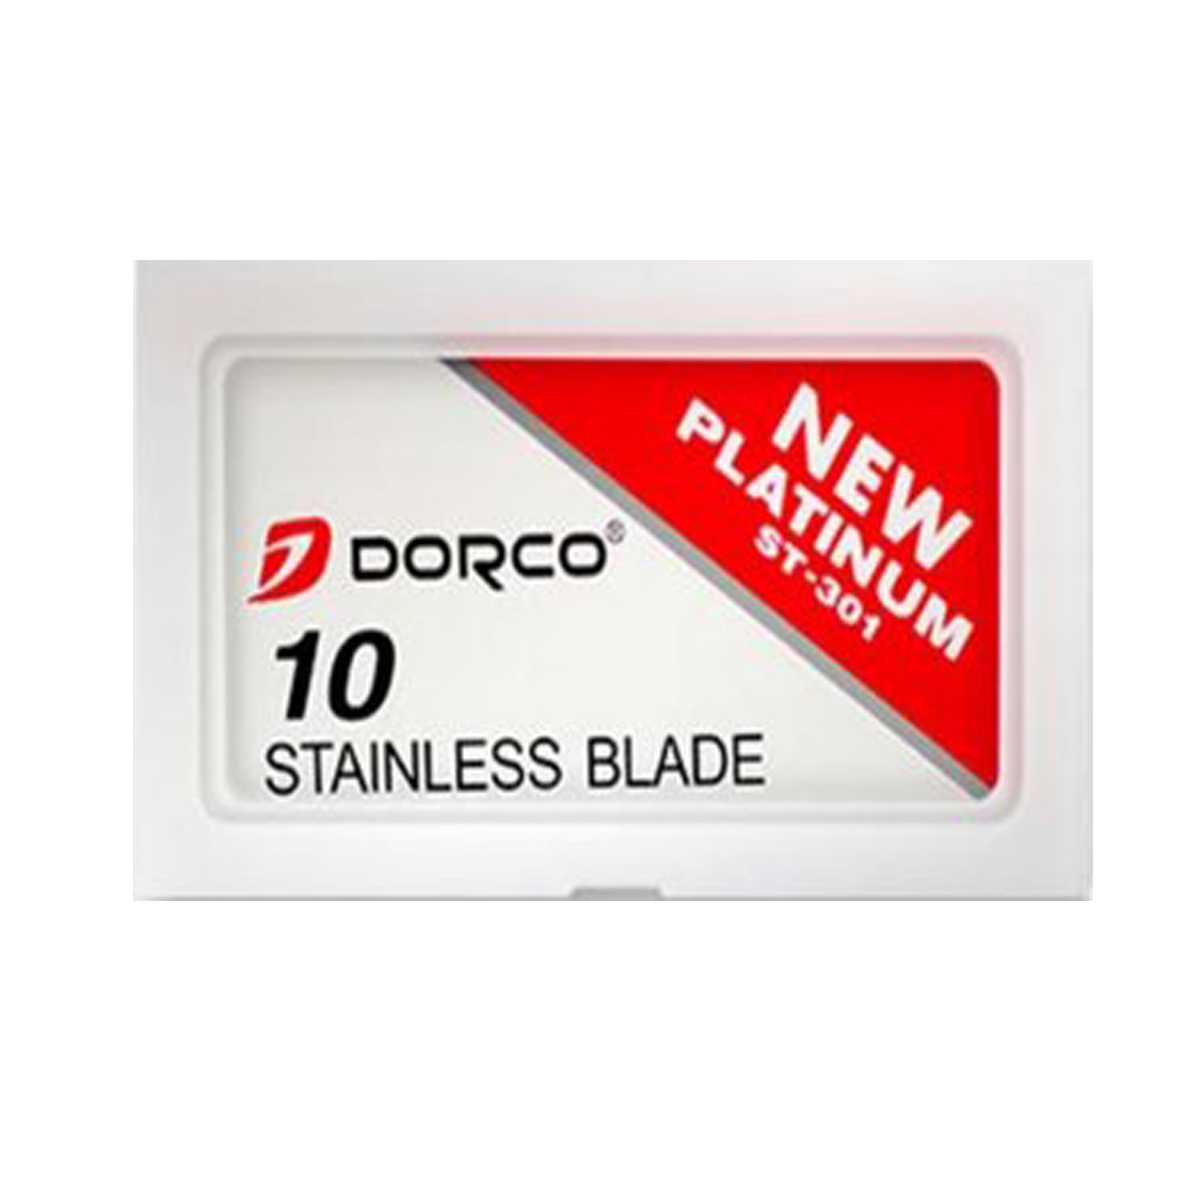 Dorco Platinum Coated Stainless Steel Safety Razor Blades (10 Pack) - Grown  Man Shave